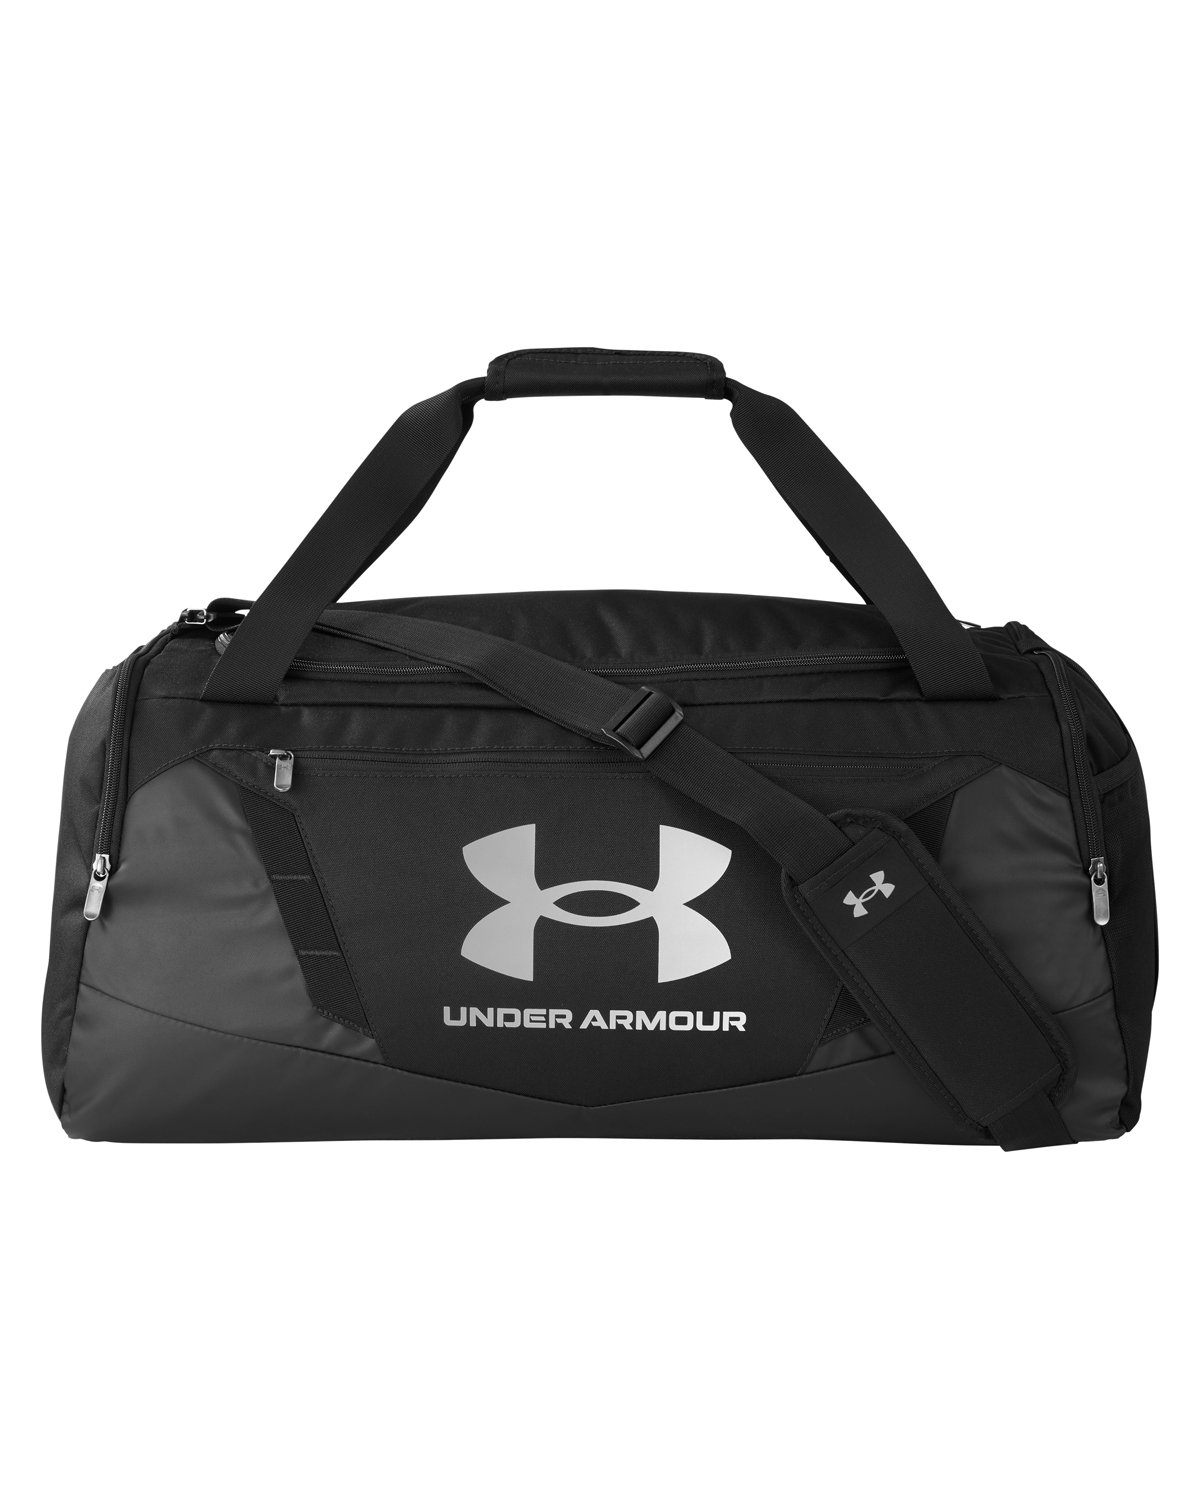 Under Armour 1369223 - Undeniable 5.0 MD Duffel Bag